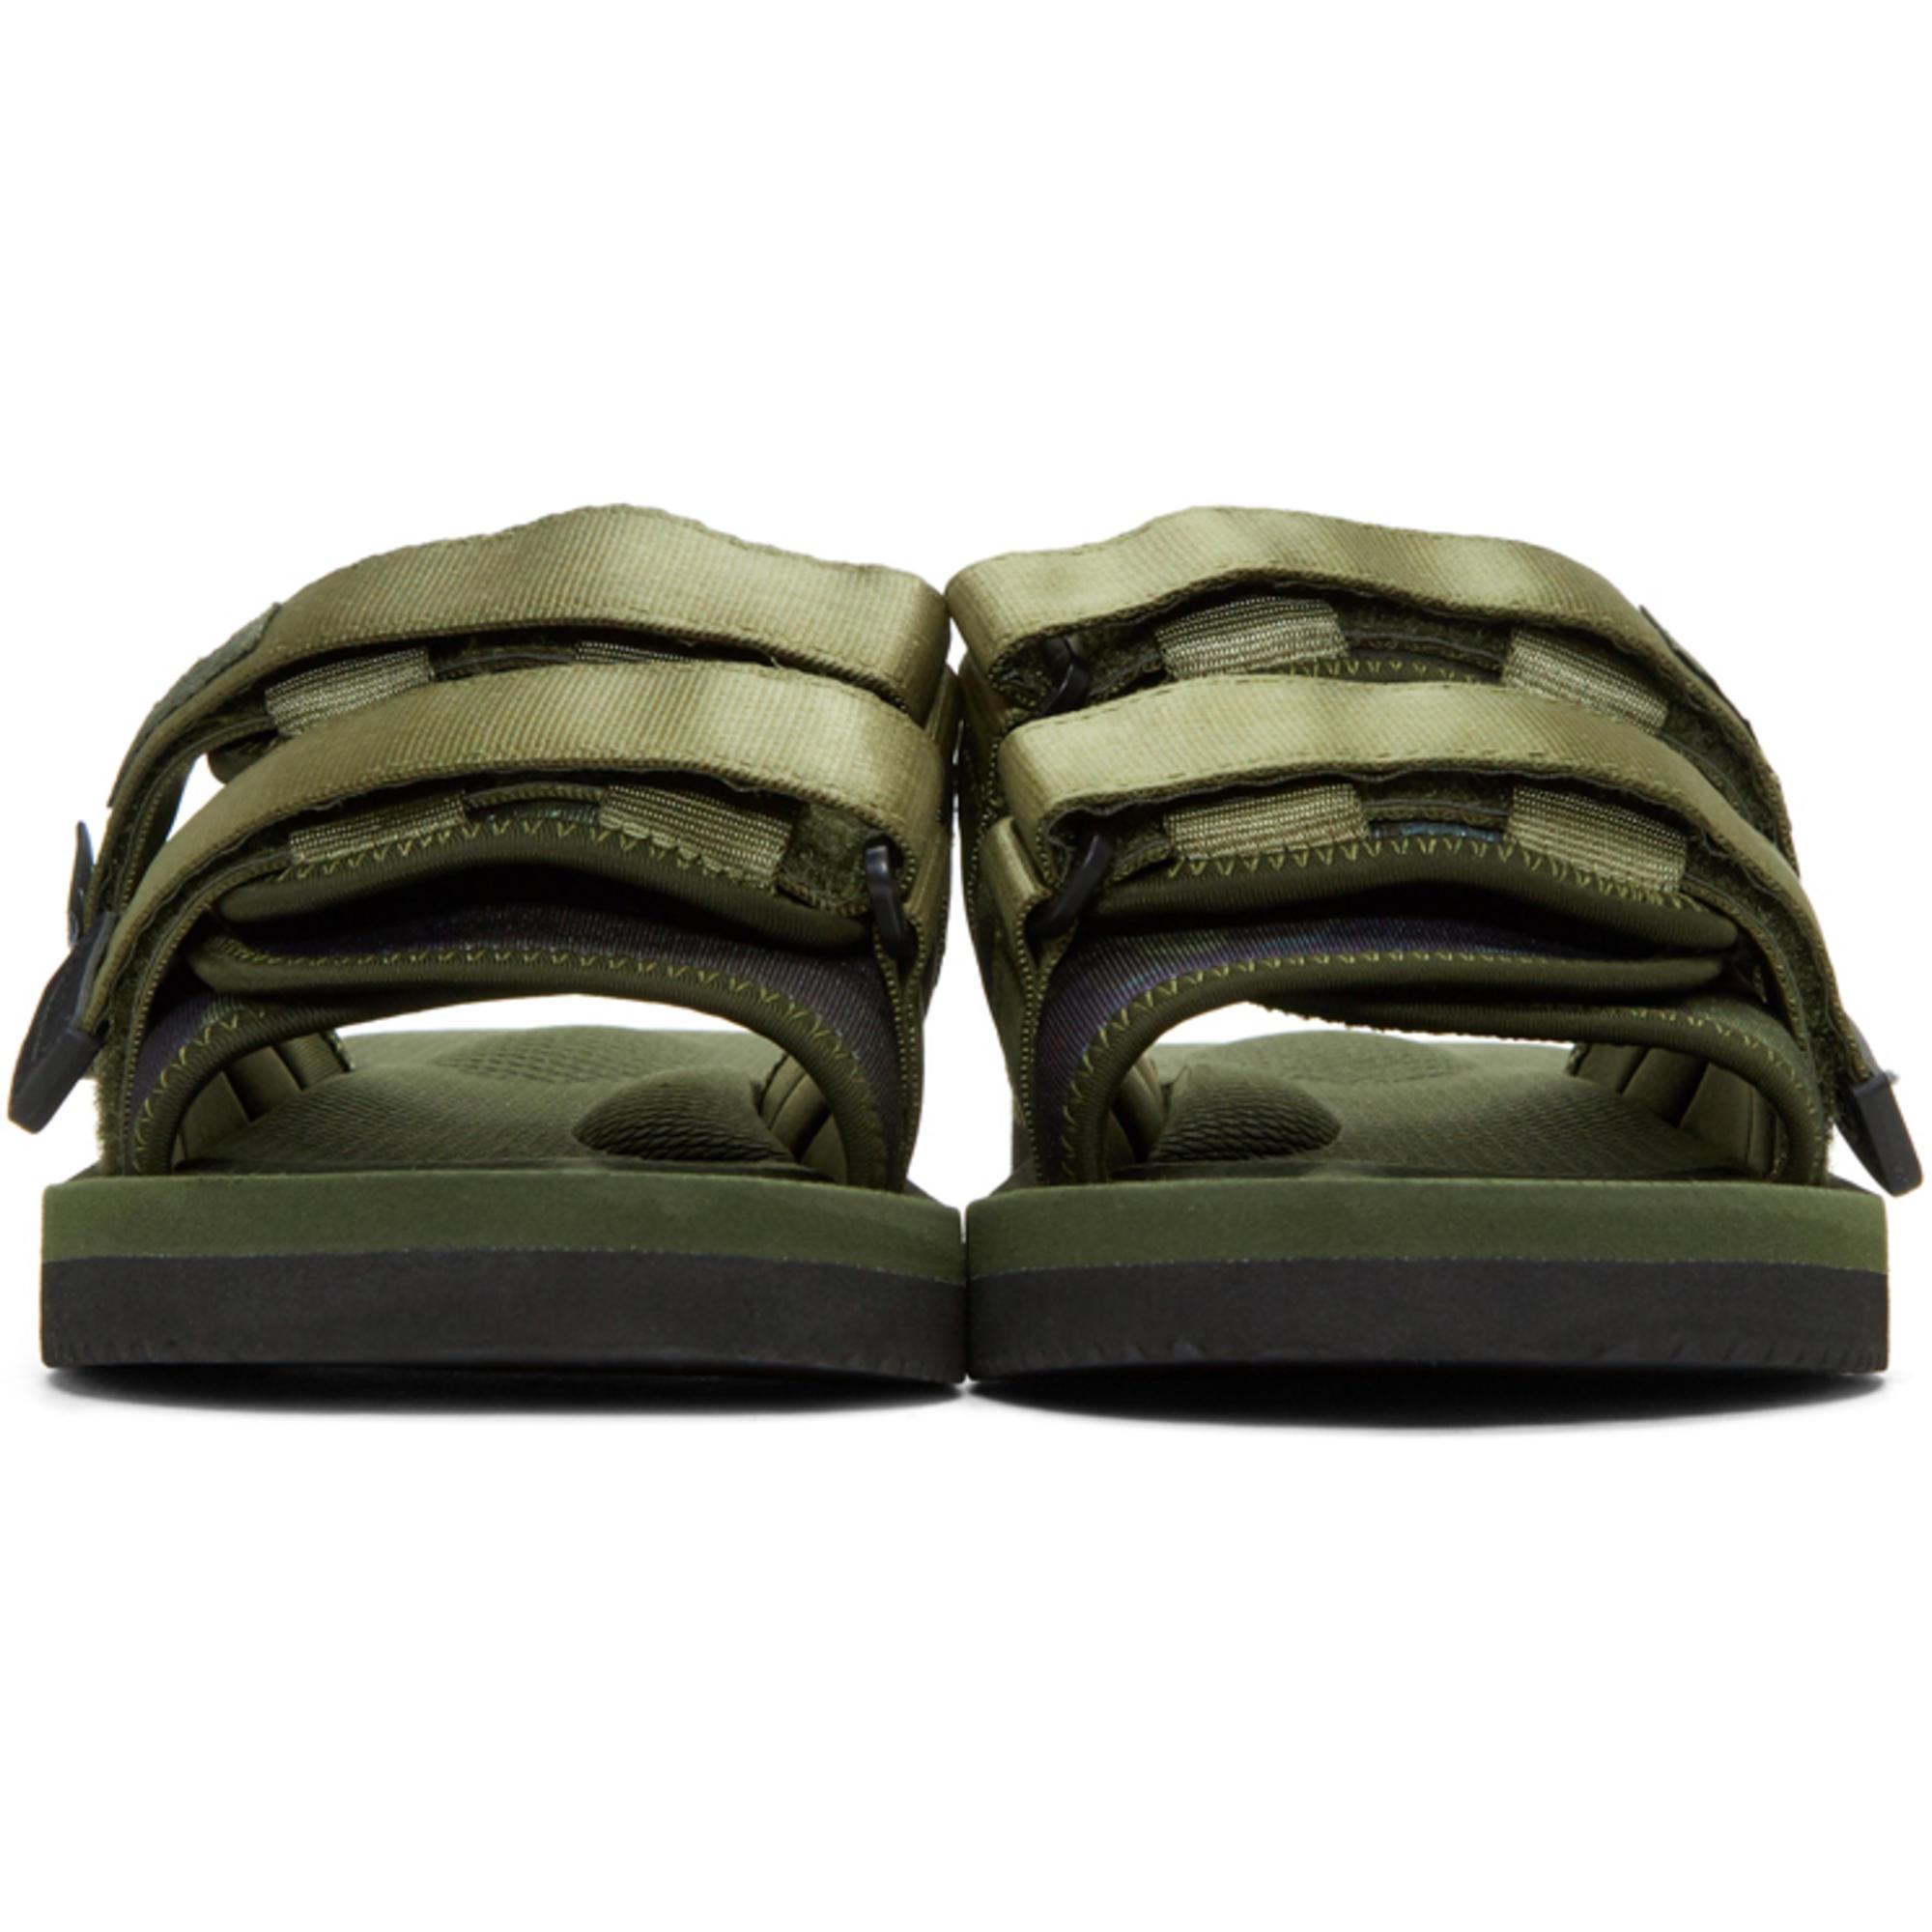 Suicoke Synthetic Green Stussy Edition Moto Sandals for